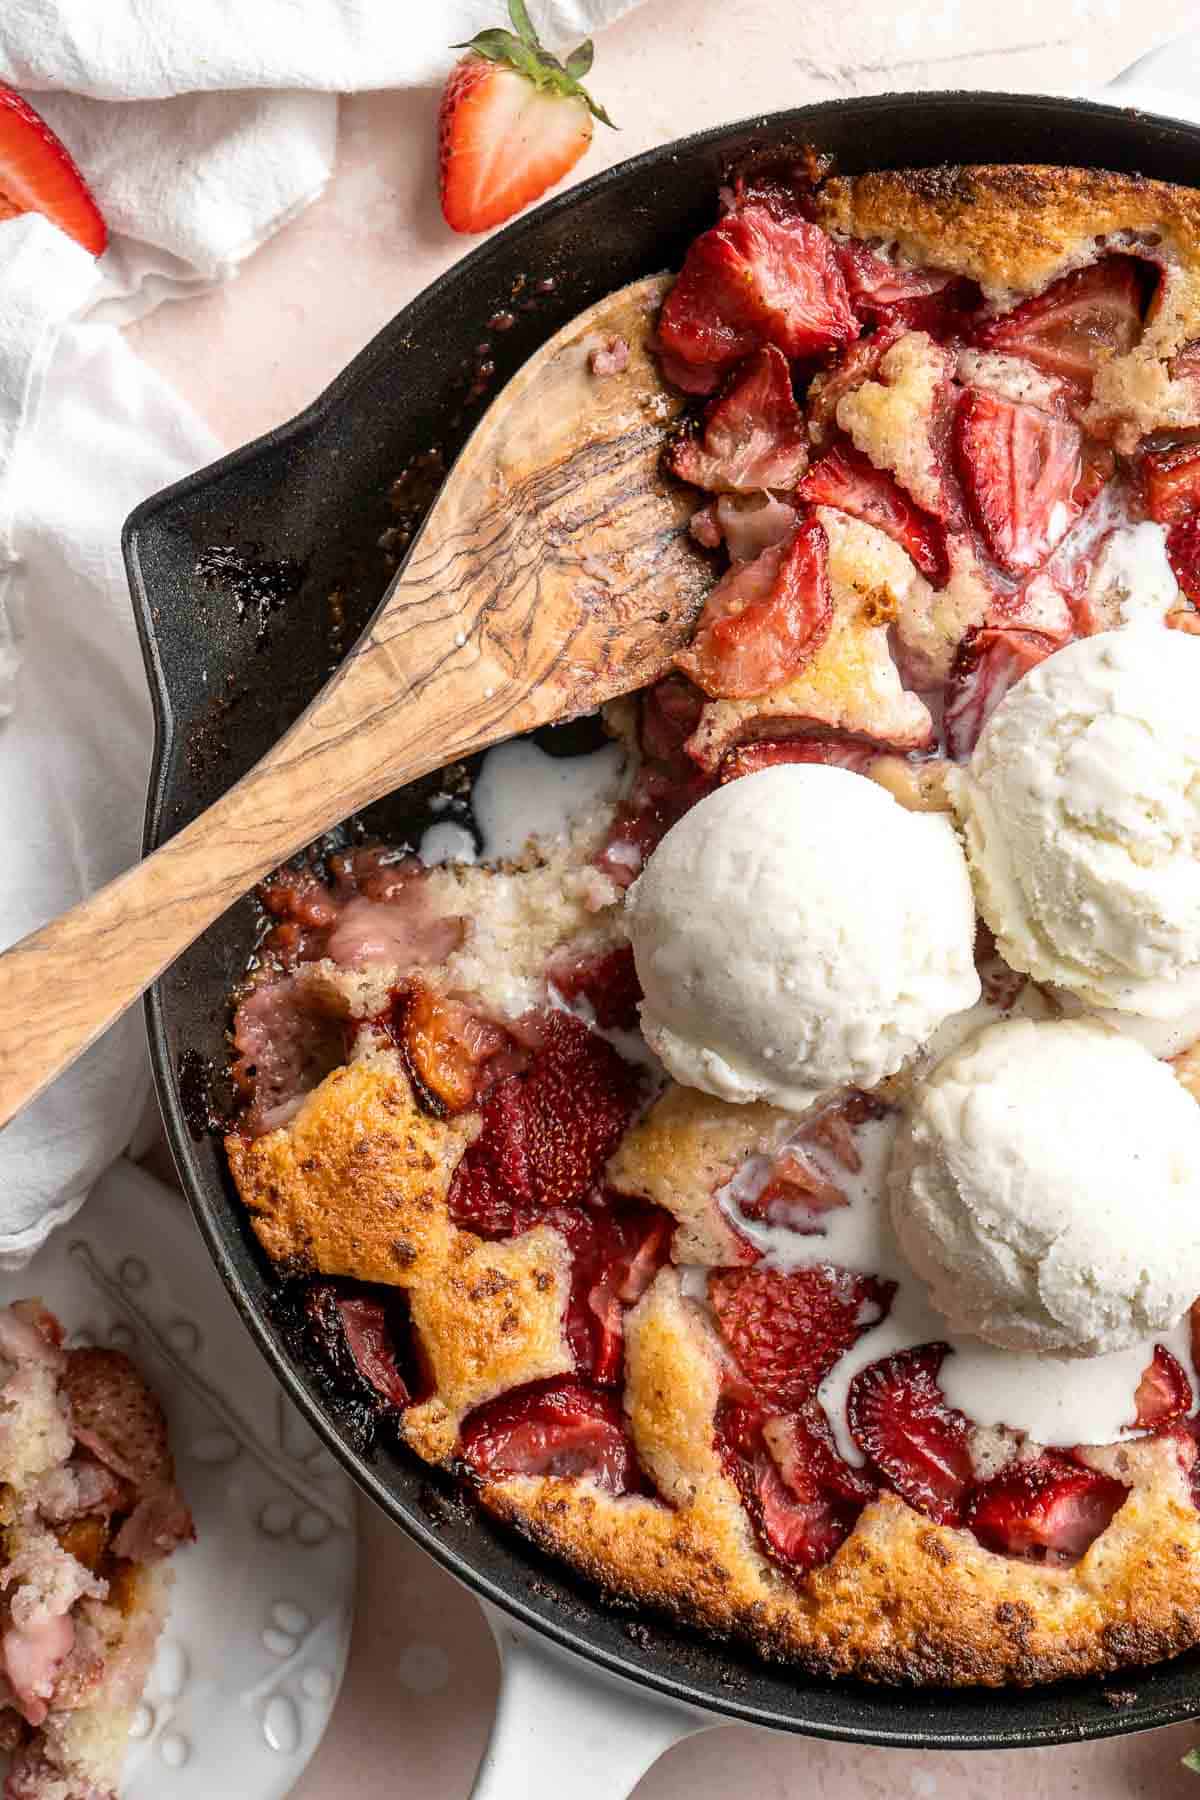 Strawberry Cobbler made with sweet, gooey strawberries and light, fluffy cakey batter is an easy summer dessert to make from scratch with 10 minutes prep. | aheadofthyme.com